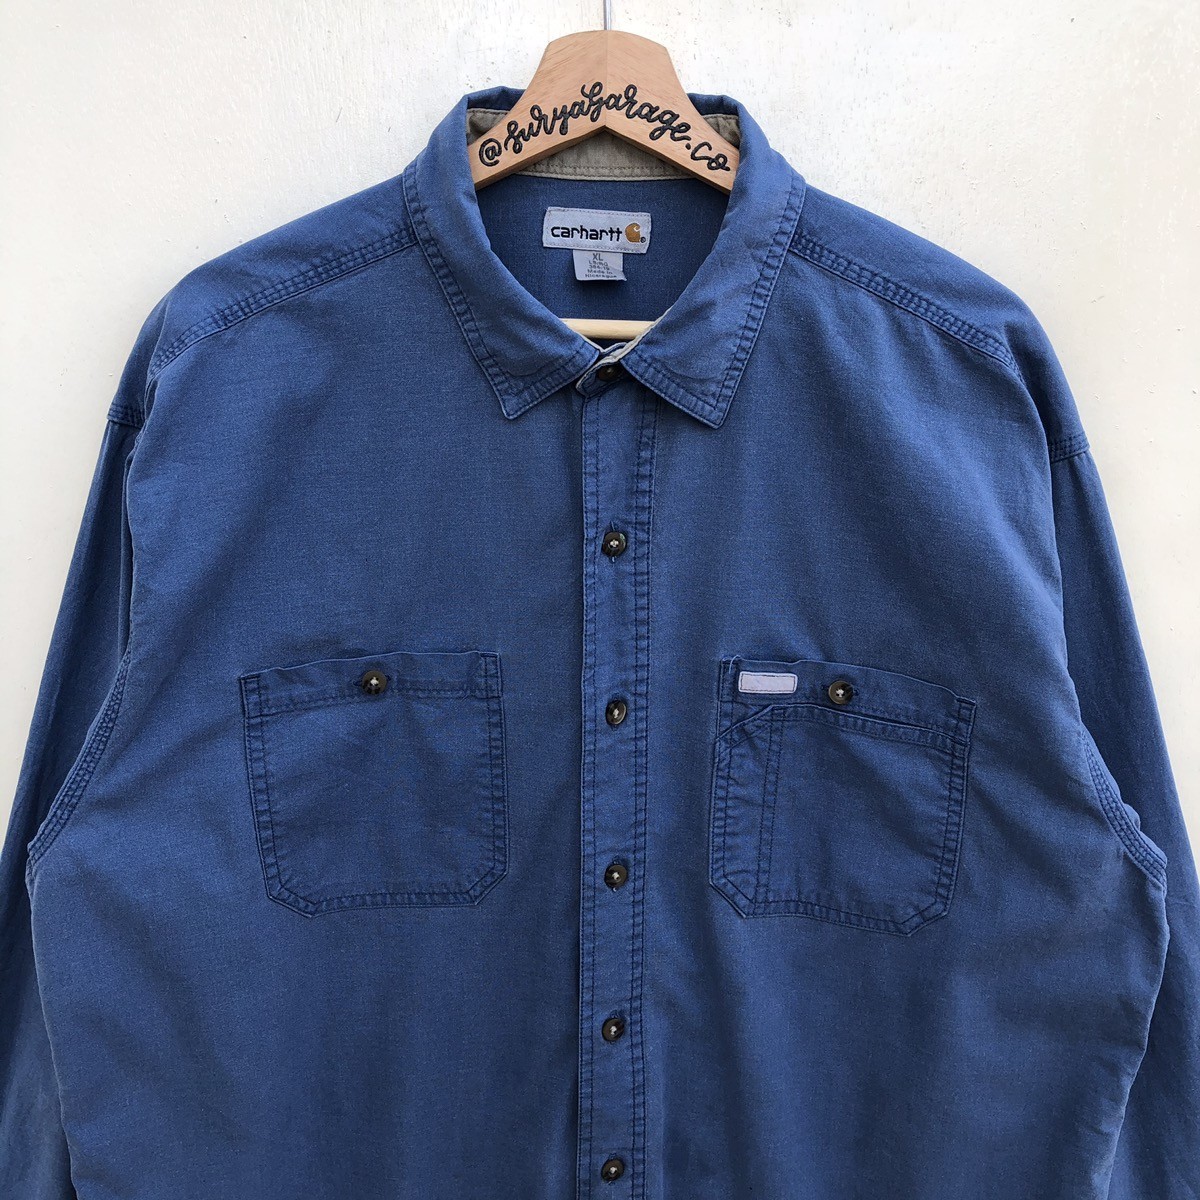 Cowley “Designed Exclusively For Rental” Shirt - 2